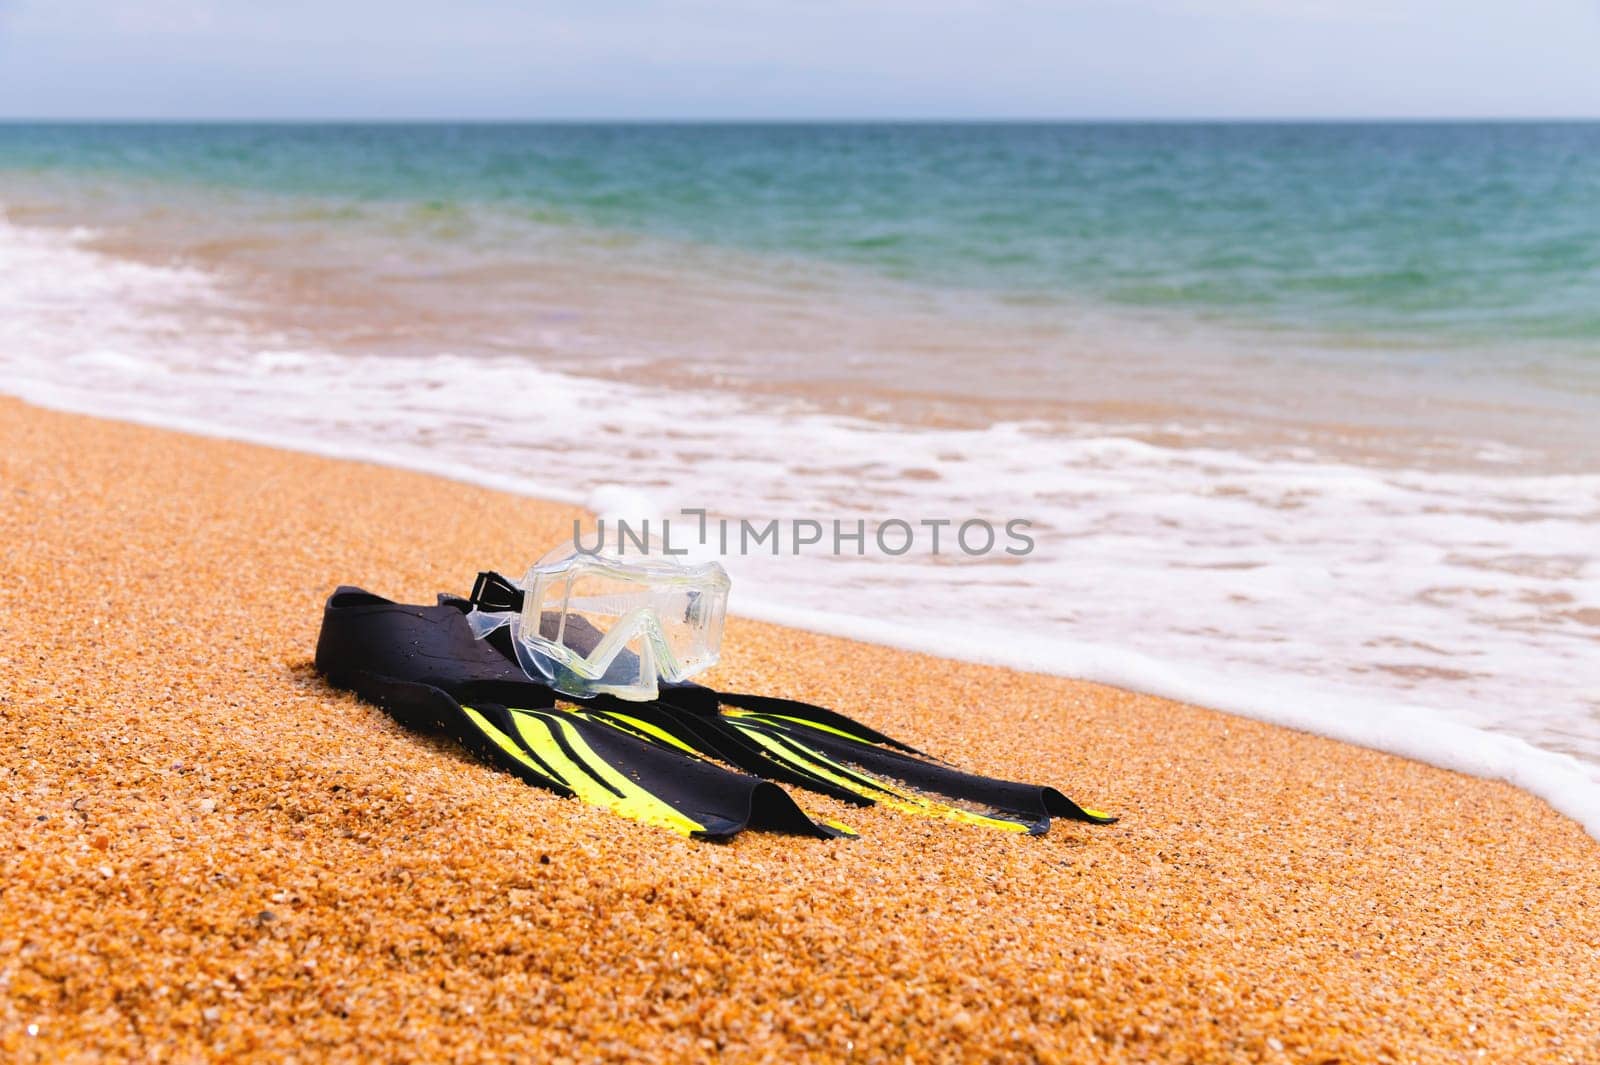 diving goggles, snorkel and fins on the beach with yellow sand. close-up of snorkeling equipment, against the backdrop of sea waves.